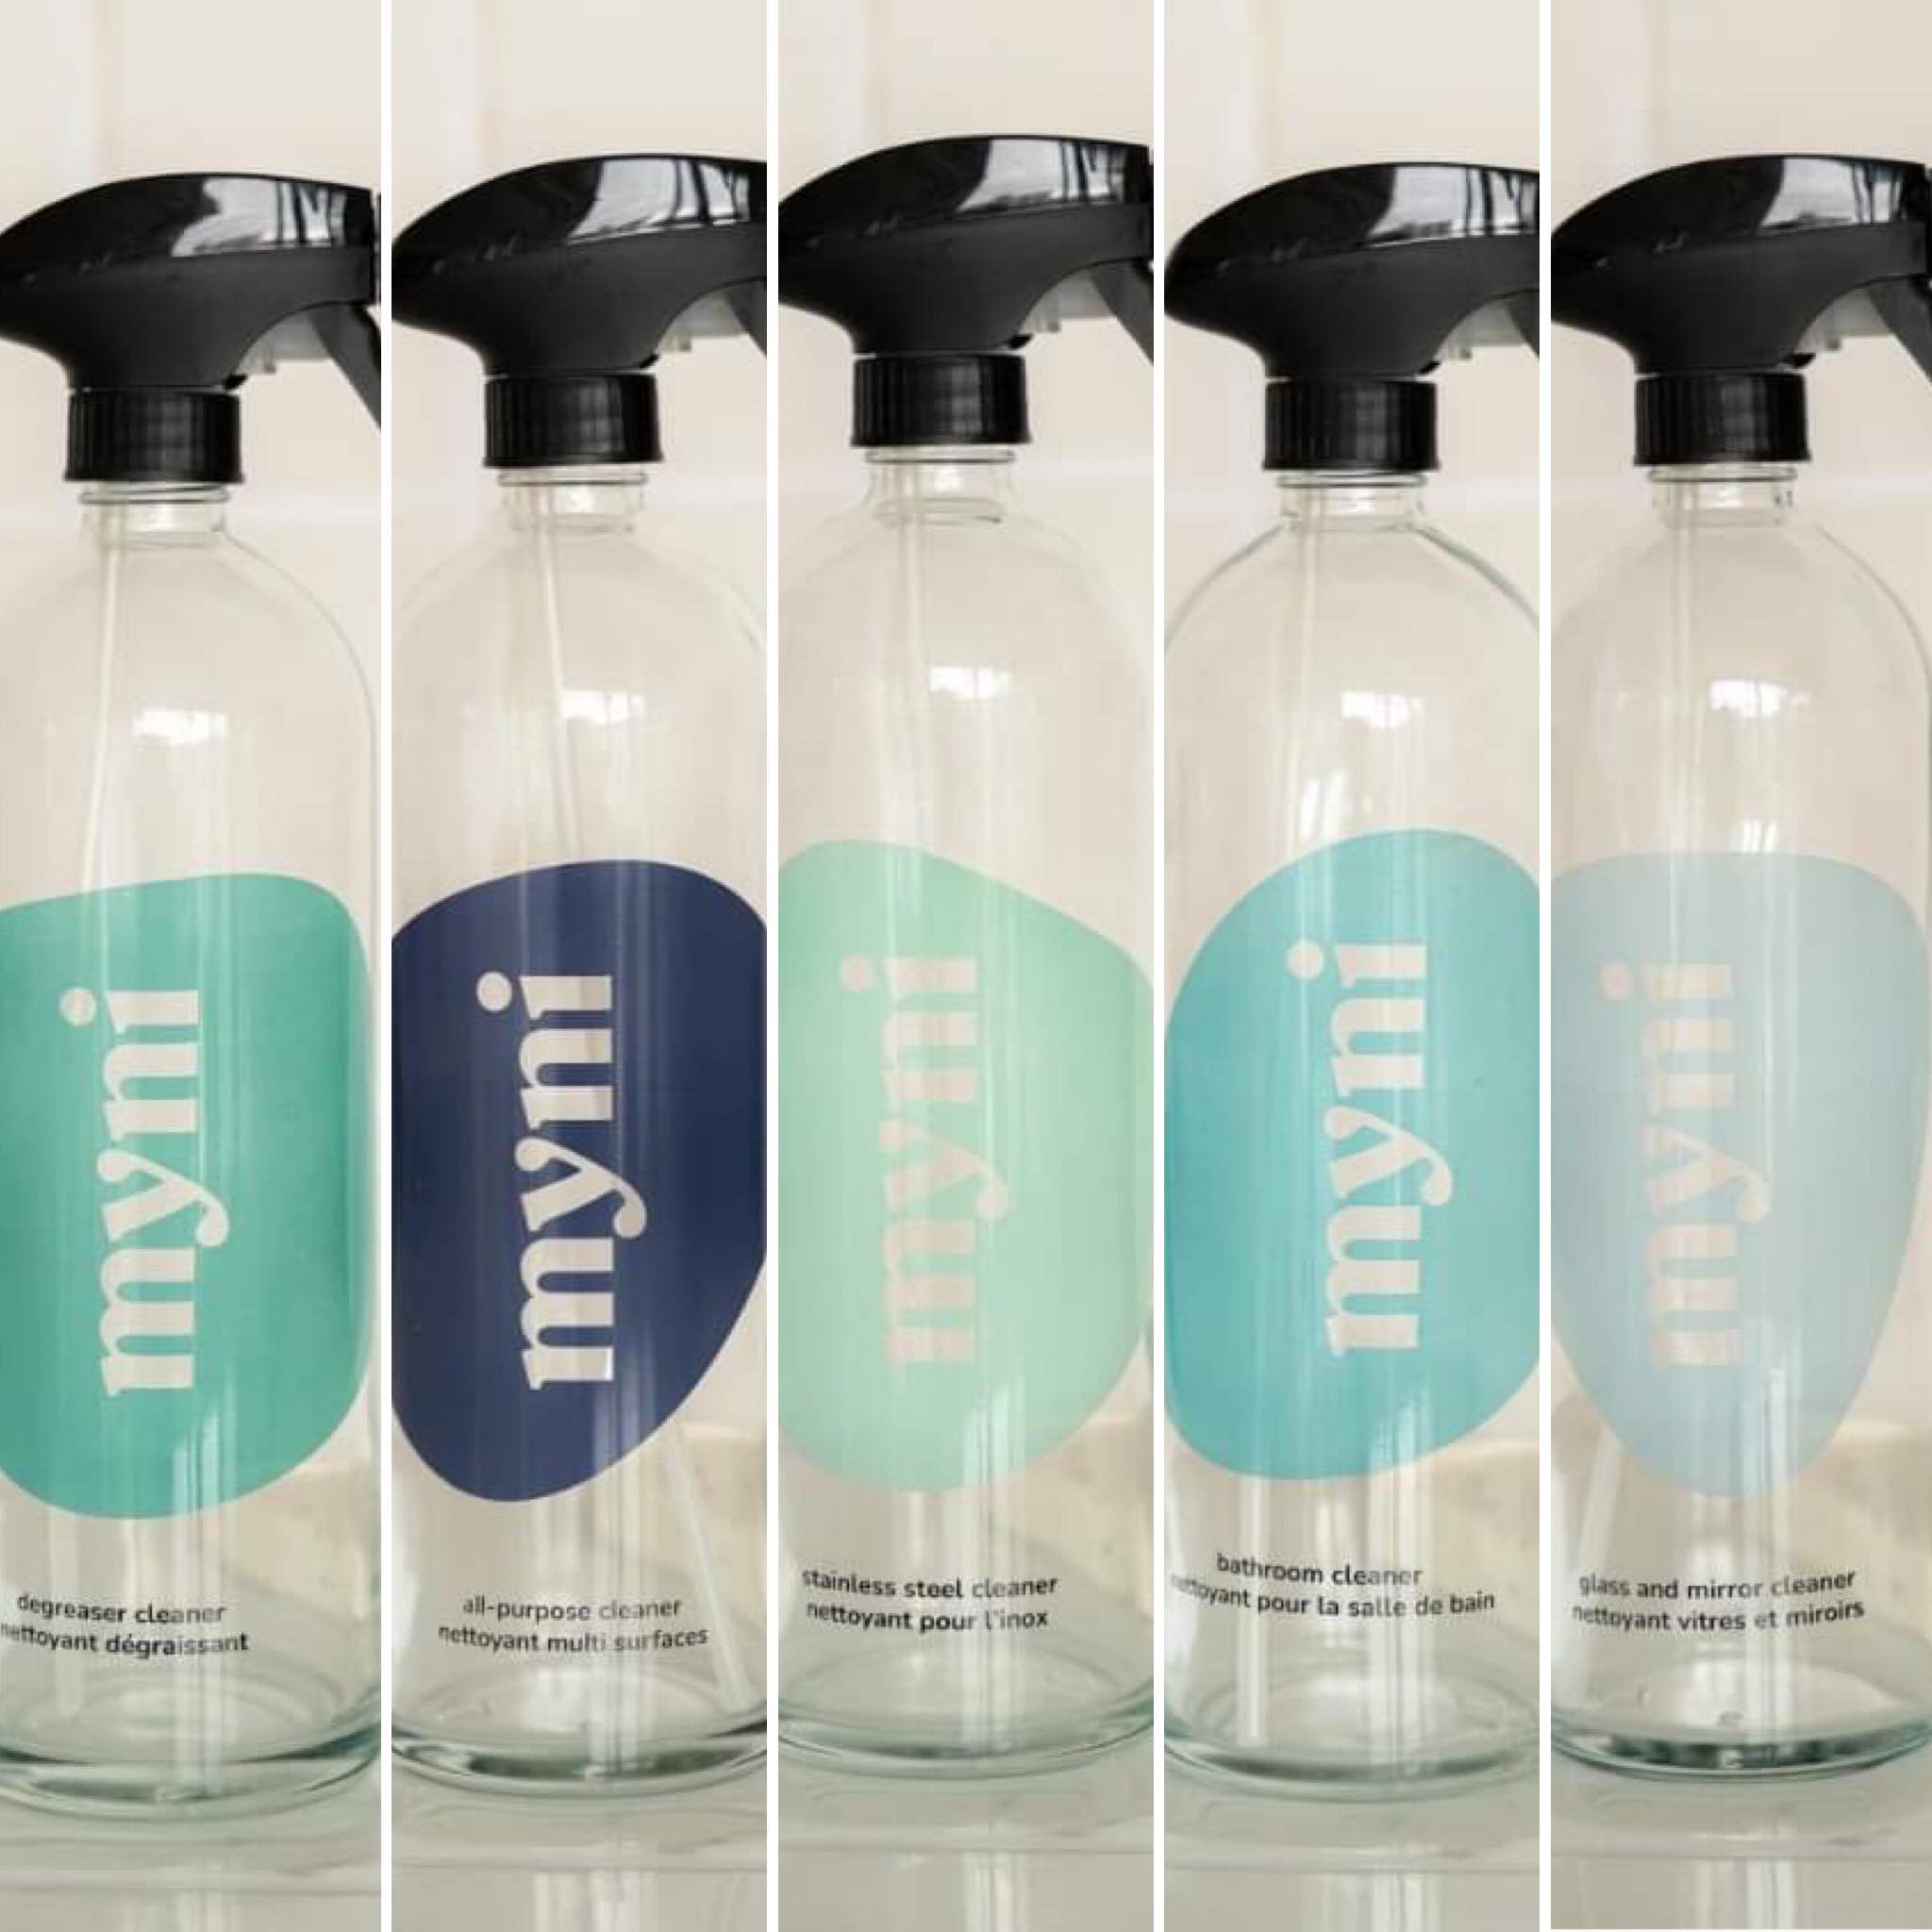 myni glass spray bottles for their line of canadian made degreaser, all purpose, stainless steel, glass and mirror, bathroom cleaner tablets